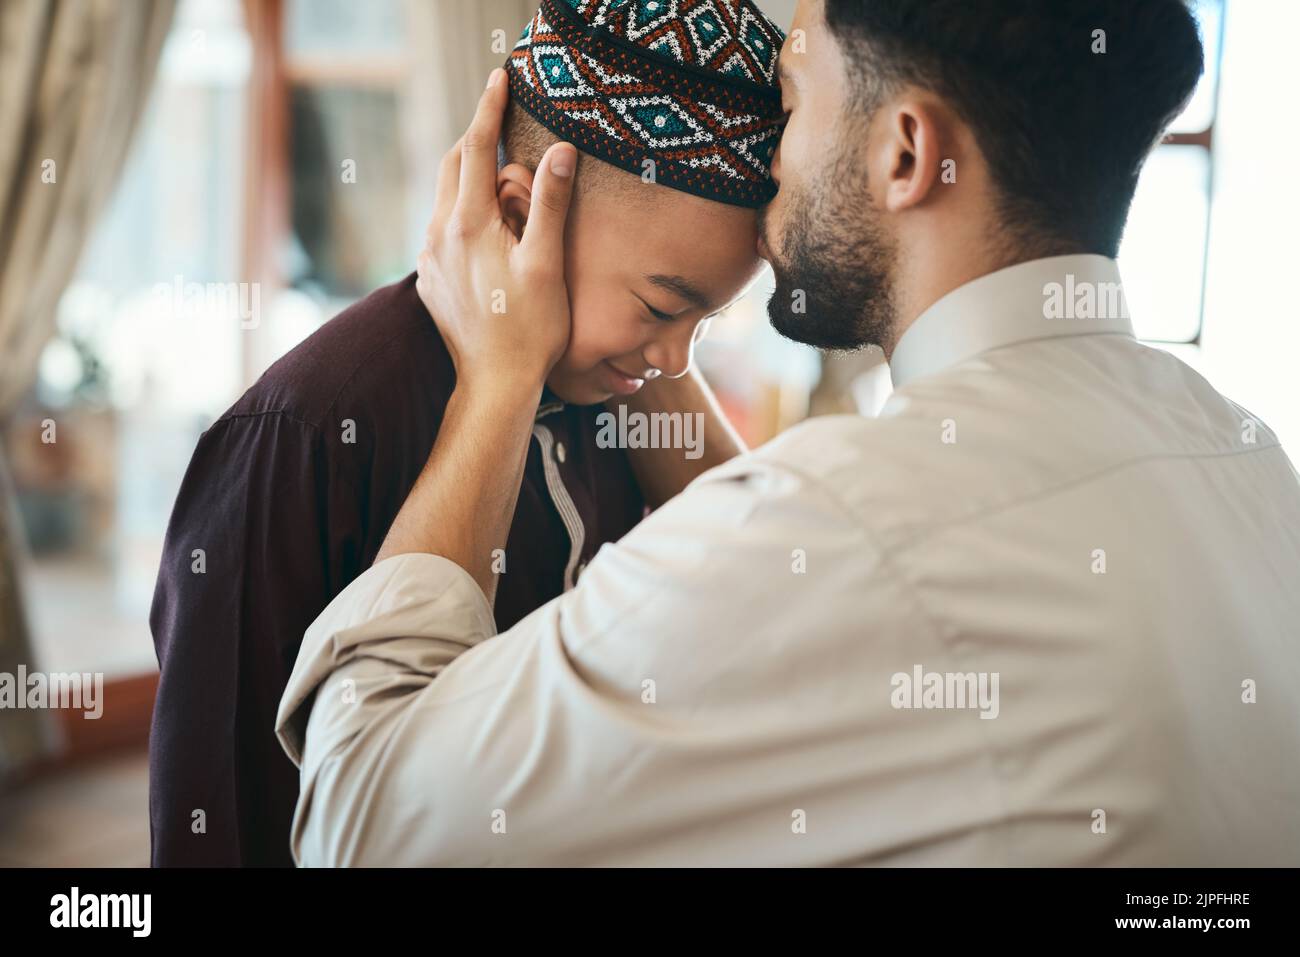 Muslim father, parent or man kissing his son on the forehead, bonding and showing affection at home. Happy, smiling and Arab boy embracing Stock Photo